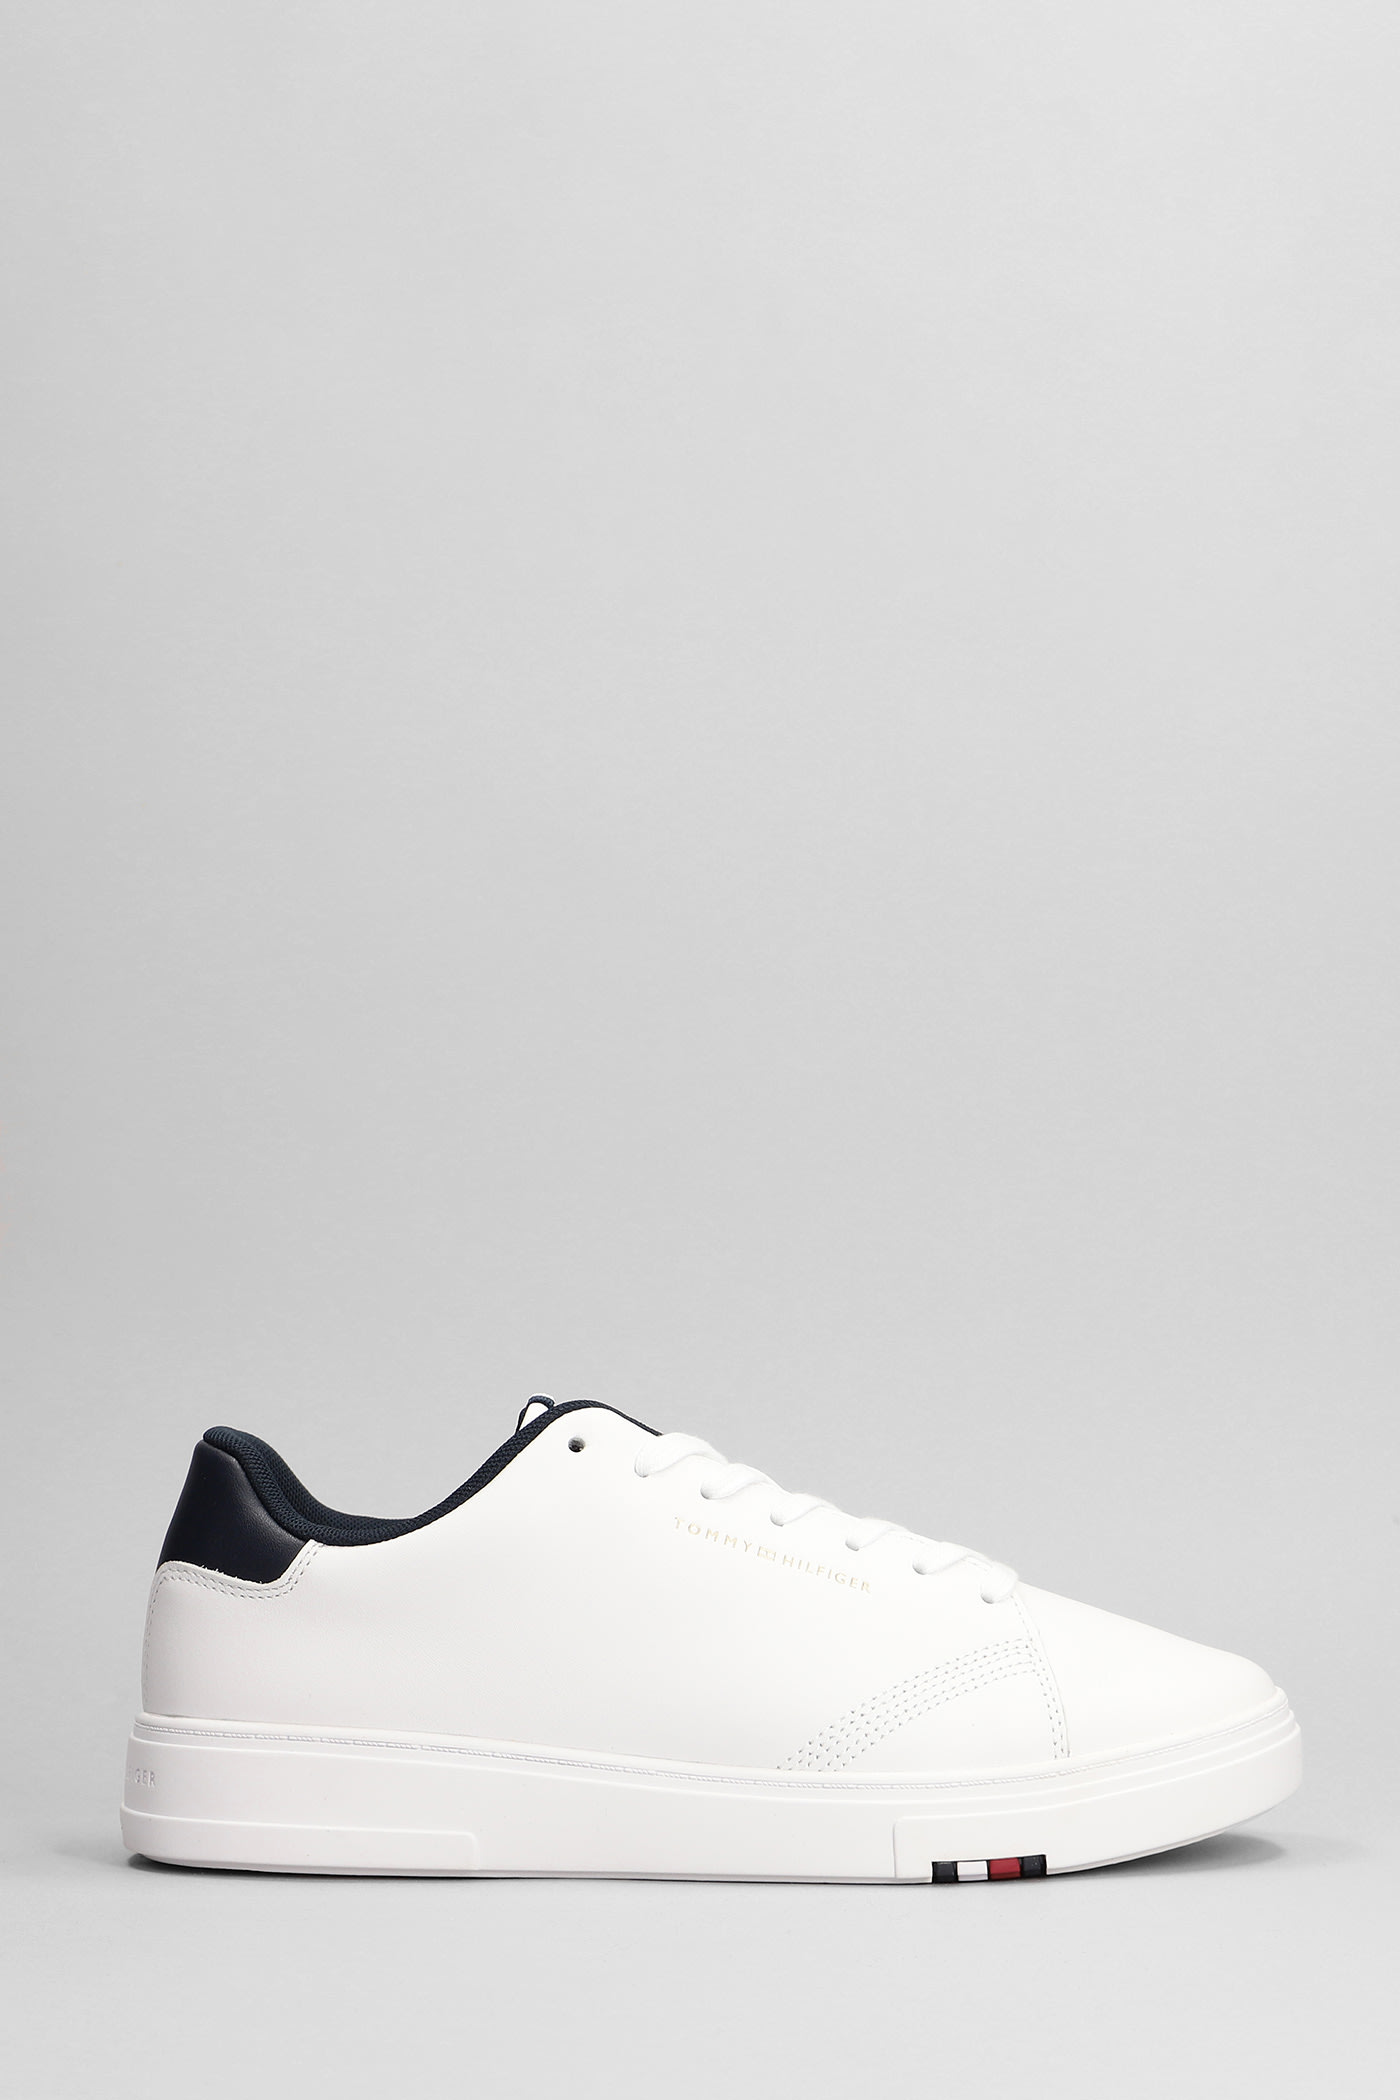 TOMMY HILFIGER SNEAKERS IN WHITE LEATHER